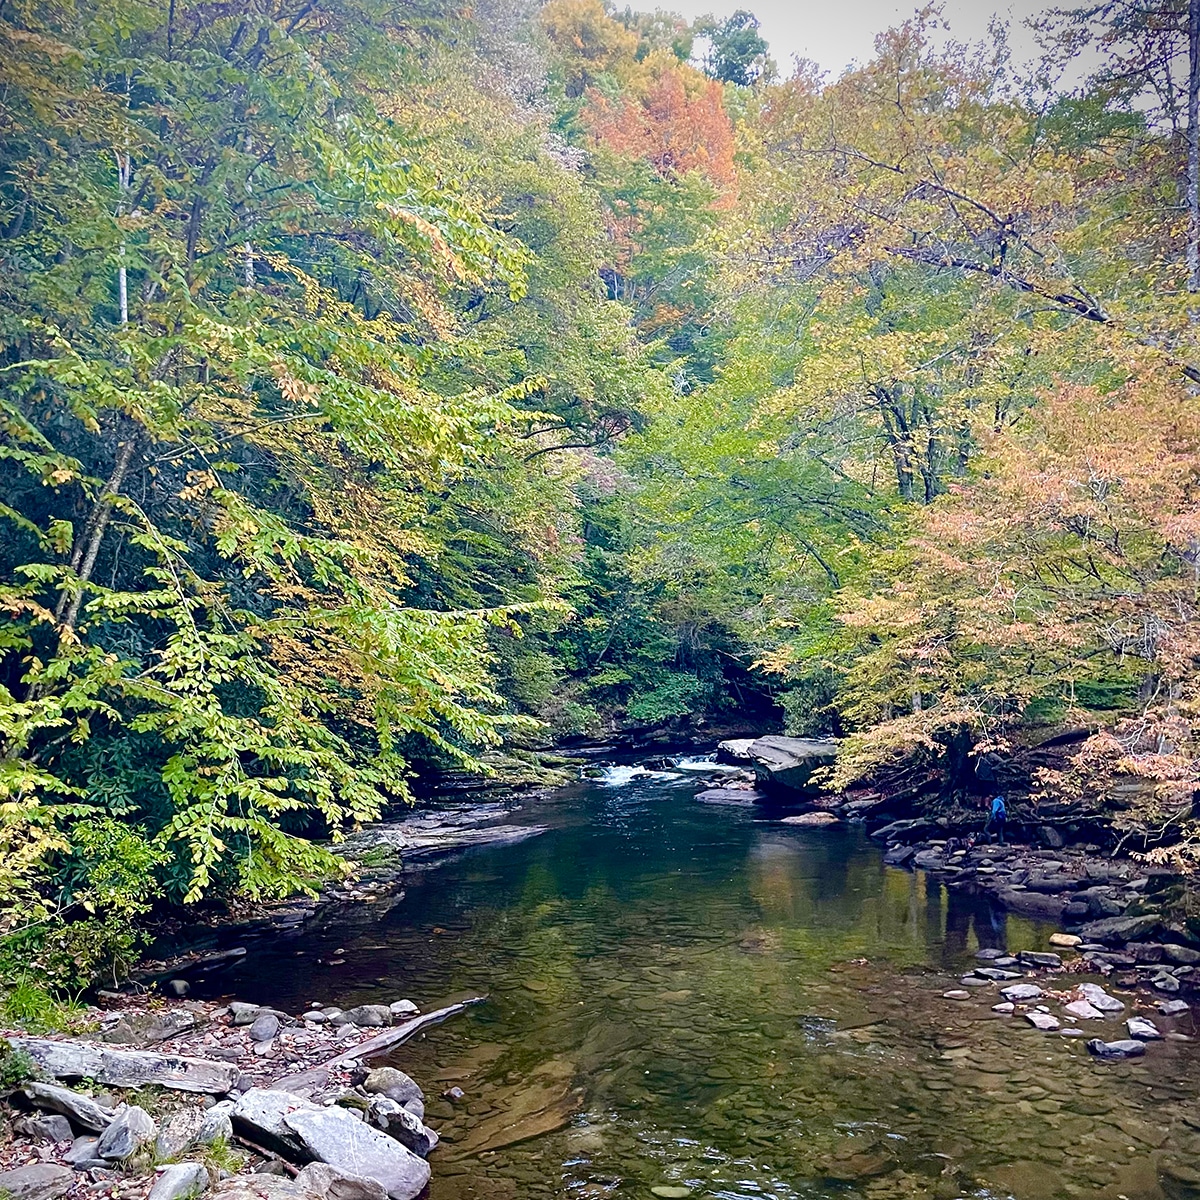 A glassy stream surrounded by trees with changing leaves in Great Smoky Mountains National Park.